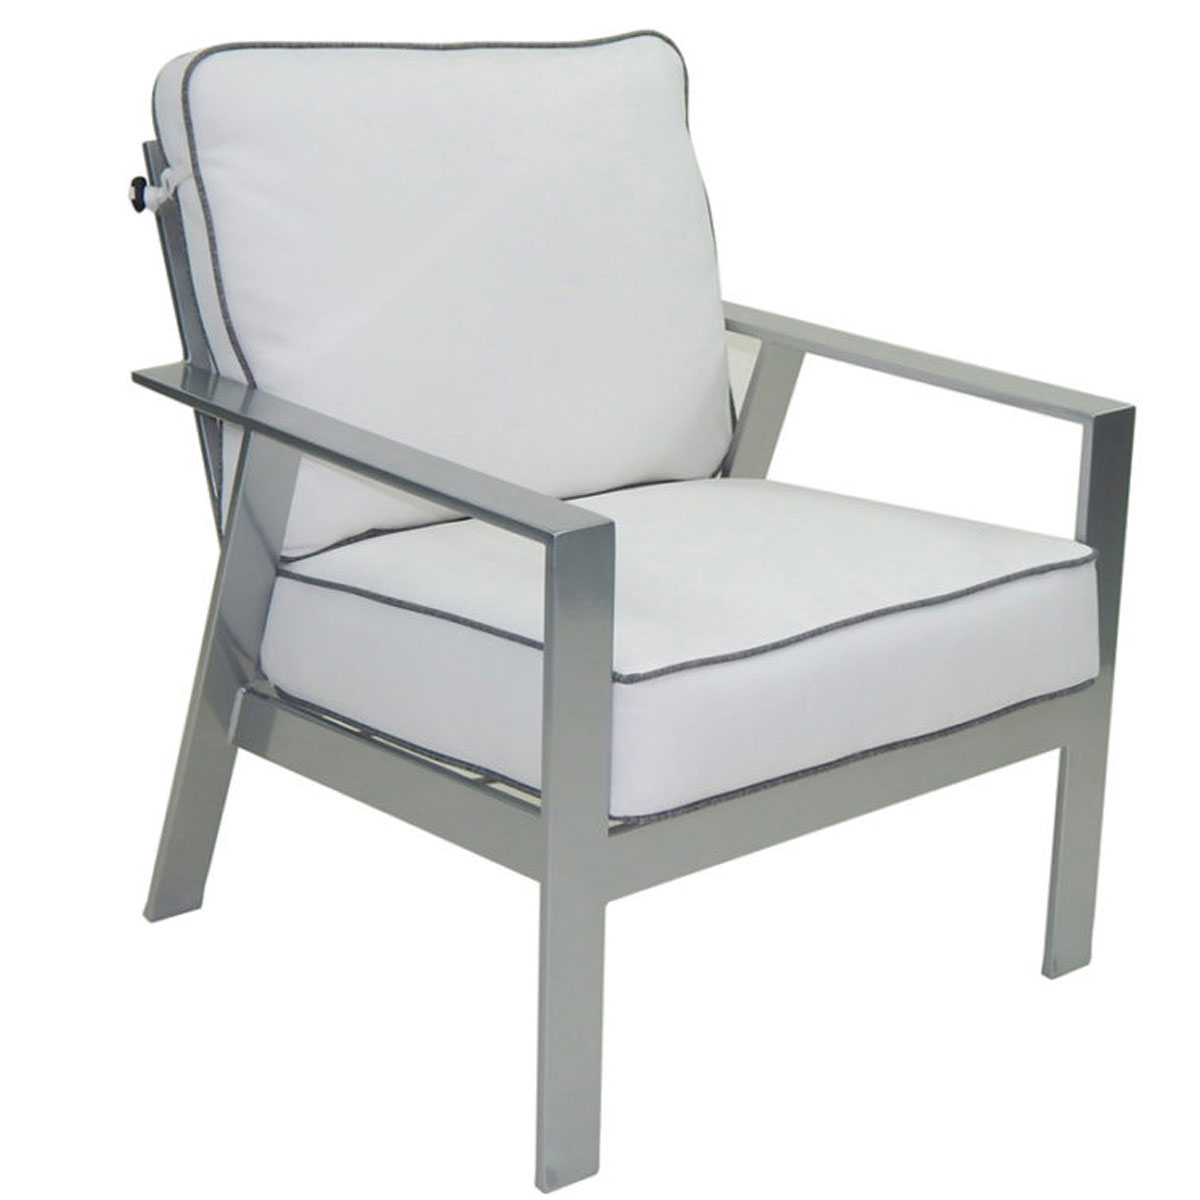 Castelle Trento Cushioned Lounge Chair